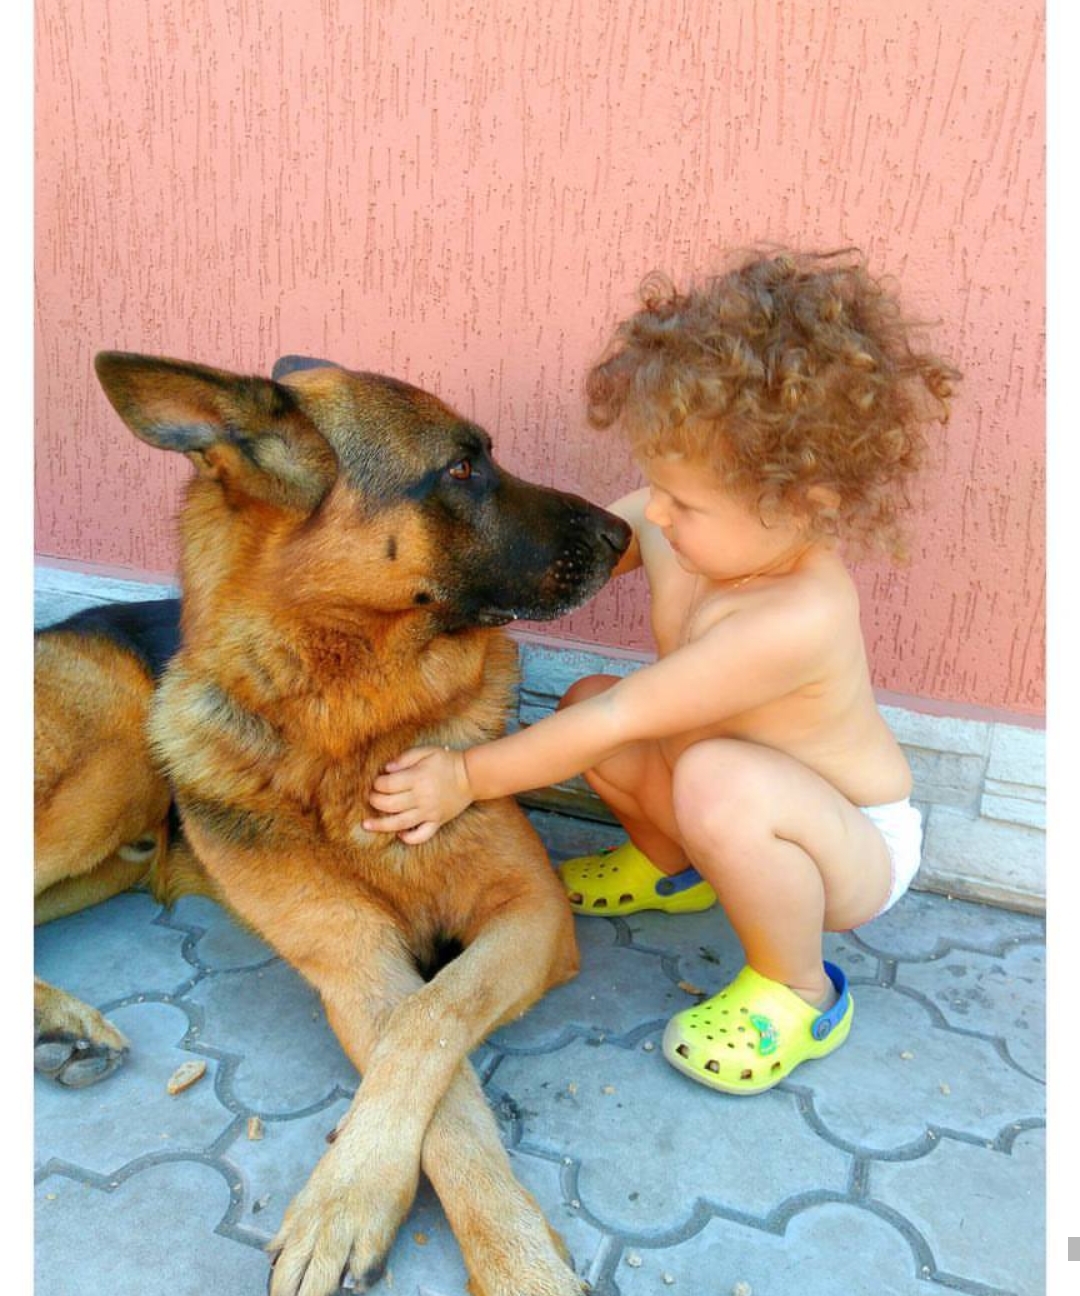 German Shepherd dog lying down on the floor while staring at the kid next to him trying to hug him